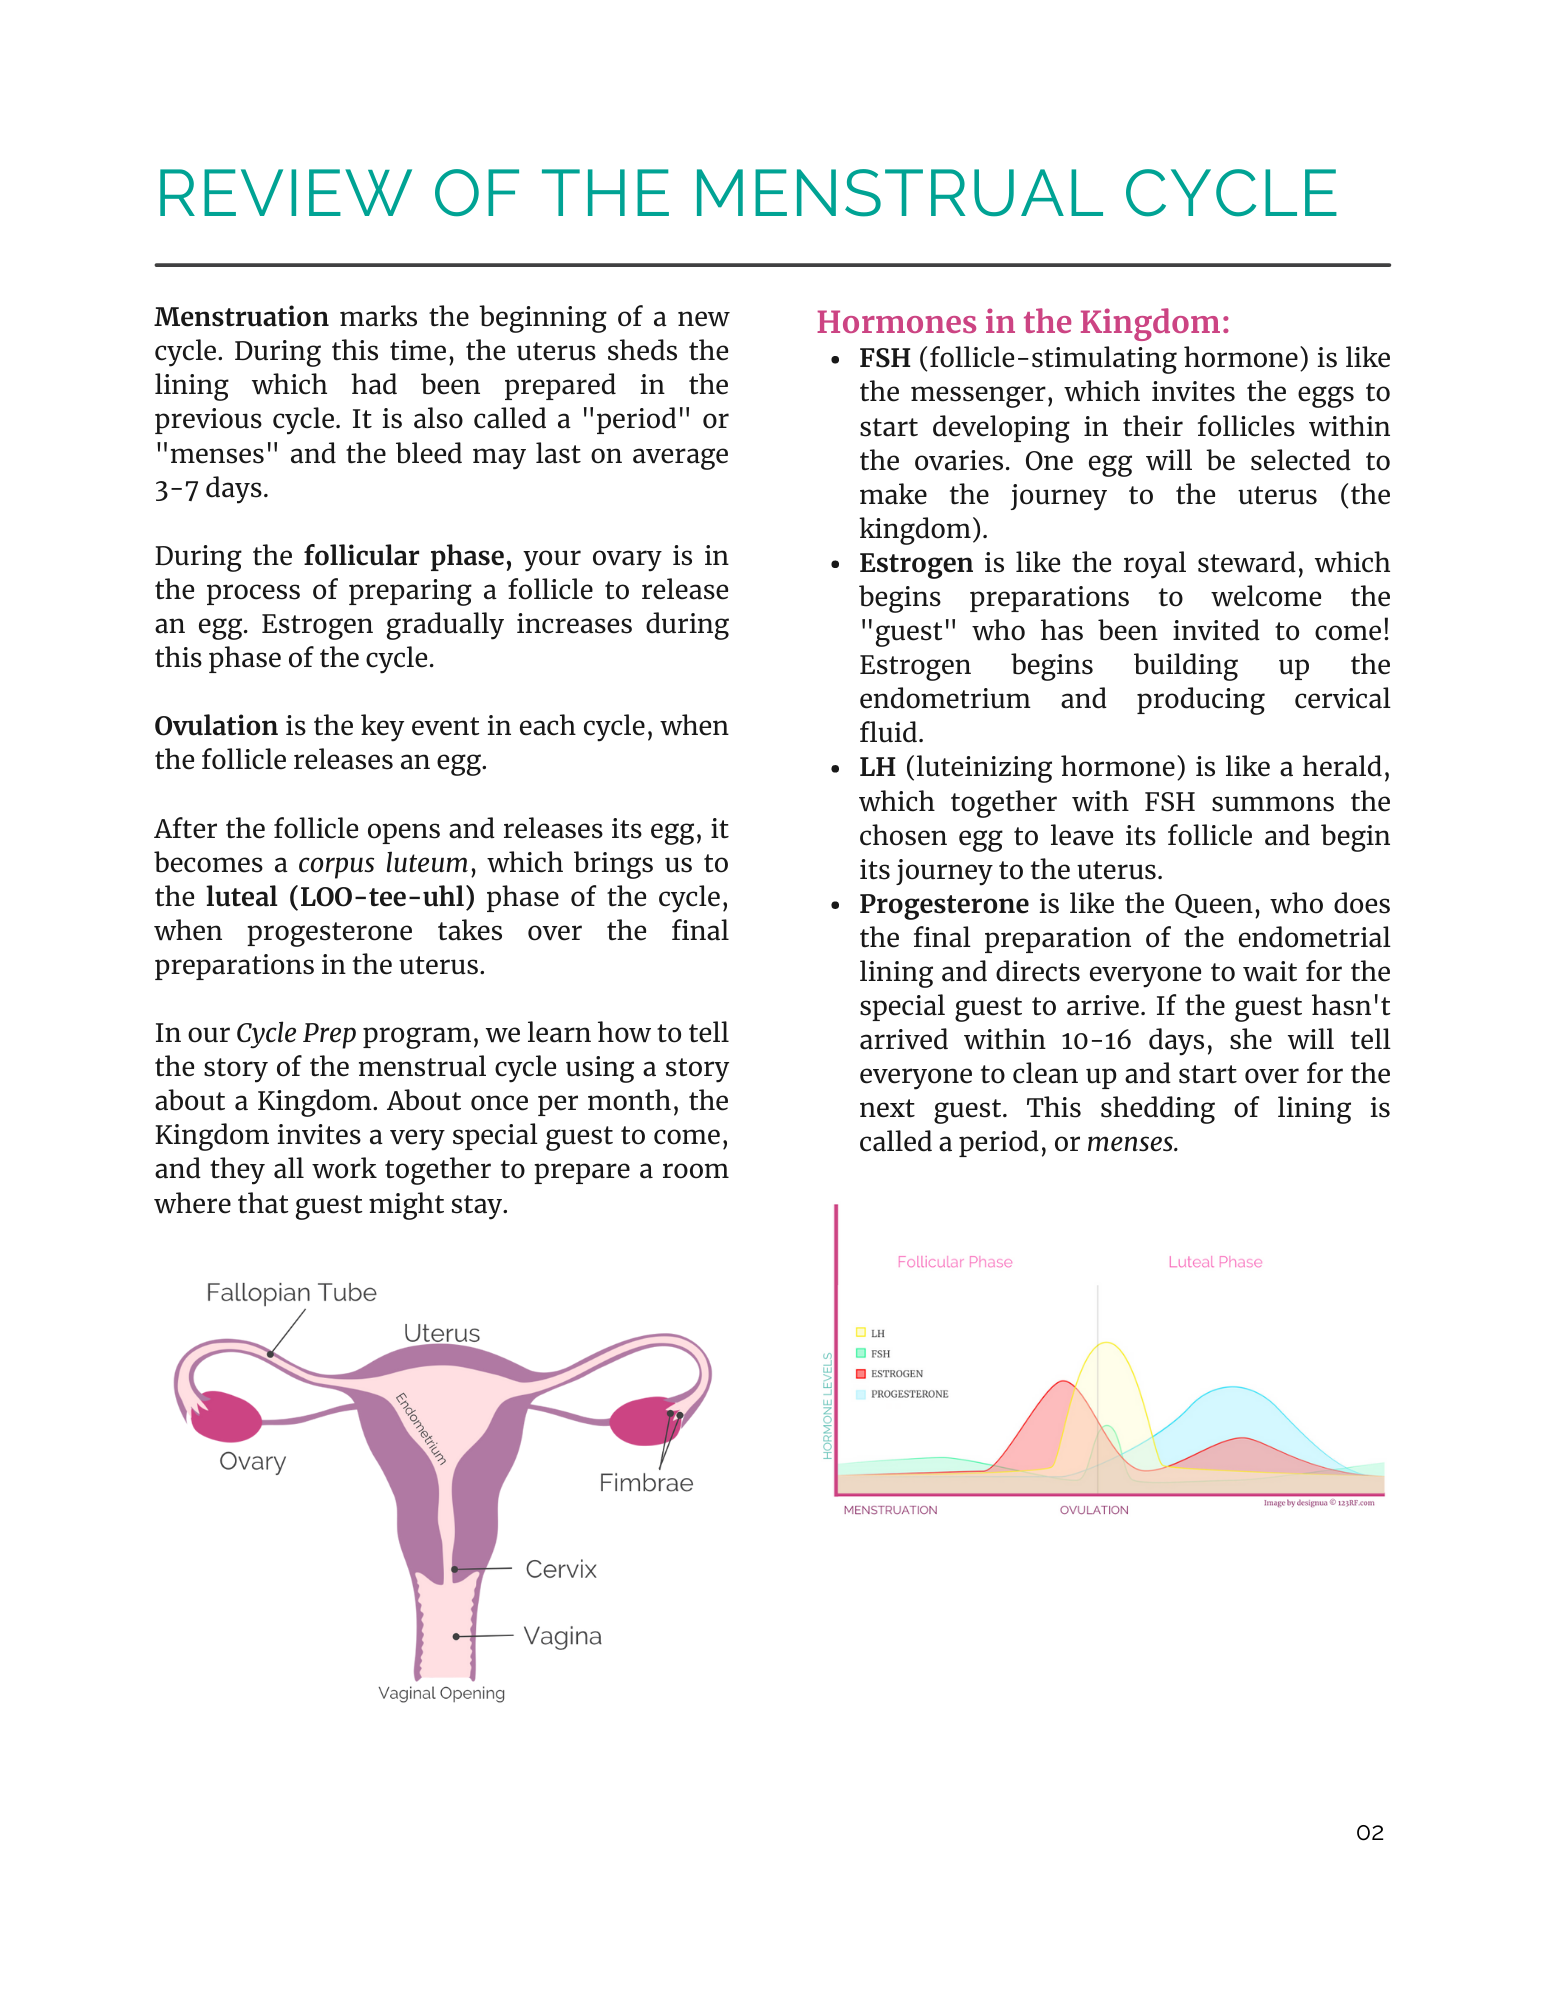 Sample page of workbook regarding review of the menstrual cycle with uterus graphic and chart